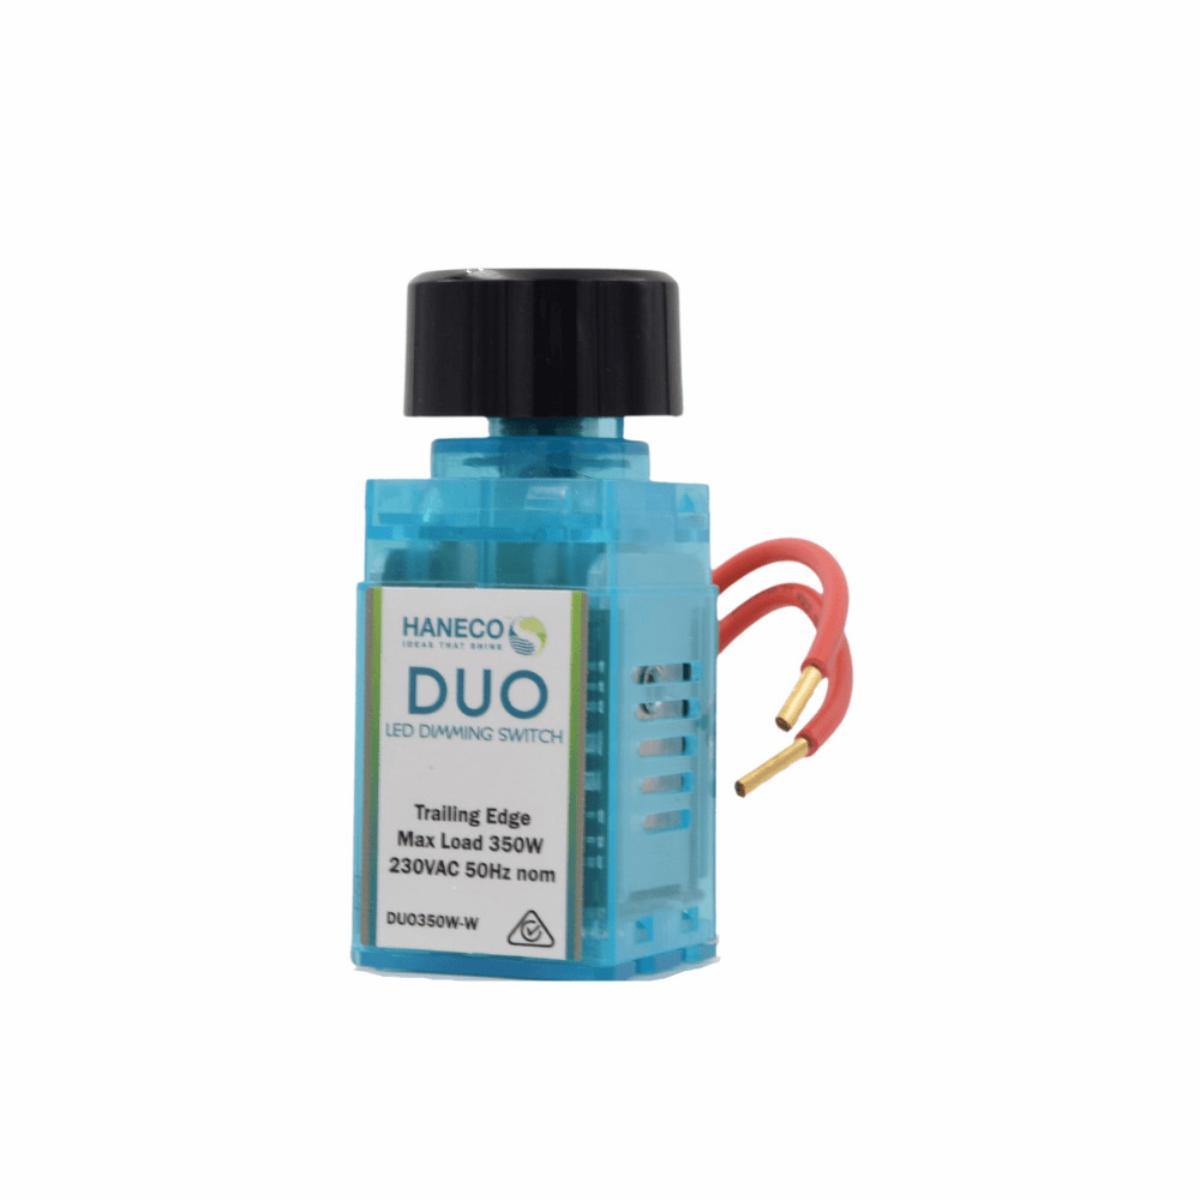 DUO LED DIMMING SWITCH TRAILING 350W